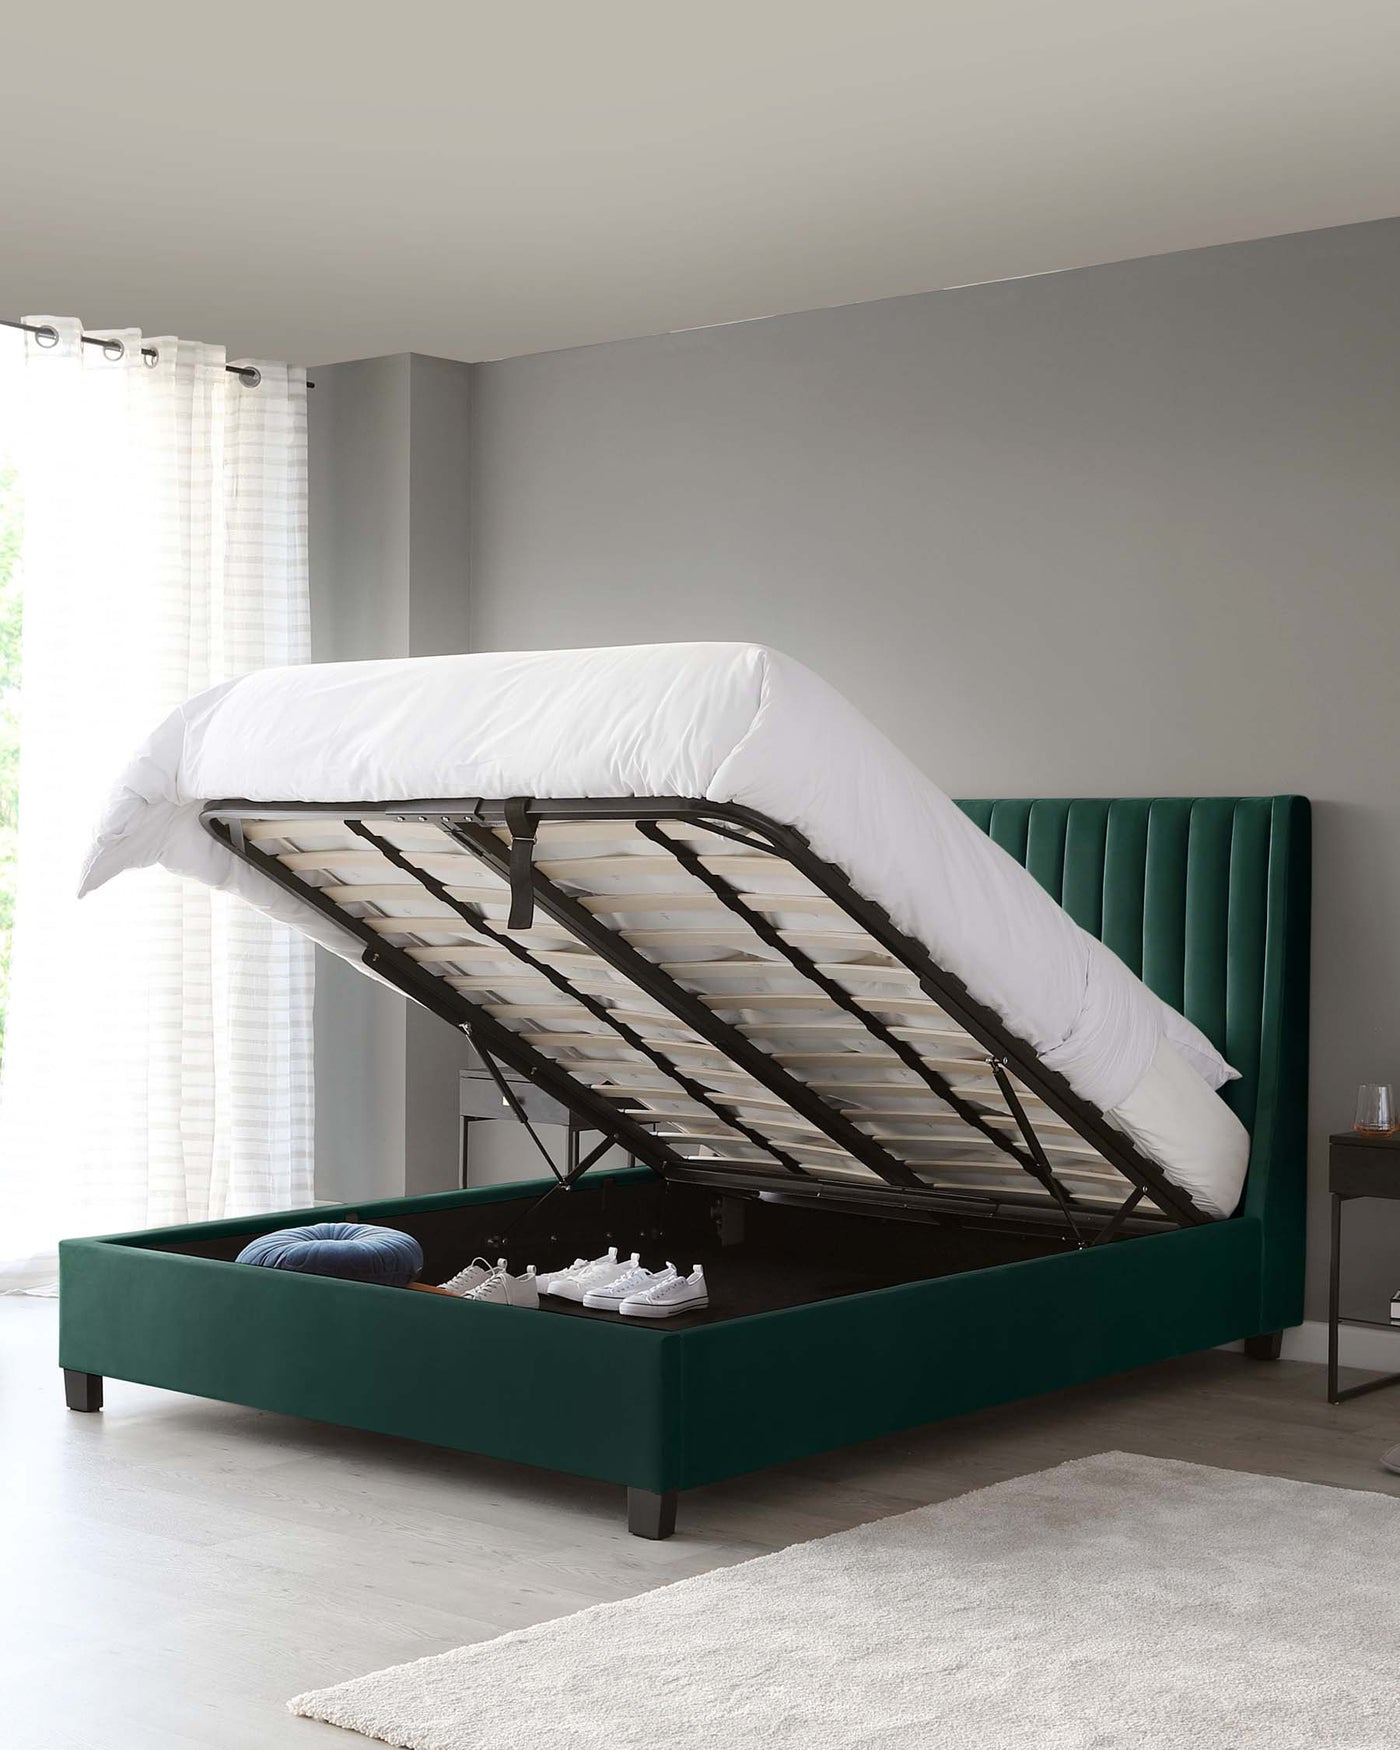 Elegant emerald green upholstered storage bed with a button-tufted headboard and a lifted base revealing a spacious storage compartment underneath. The bed has a modern design with a low-profile silhouette and is complemented by a simple dark-coloured side table with a matching aesthetic.